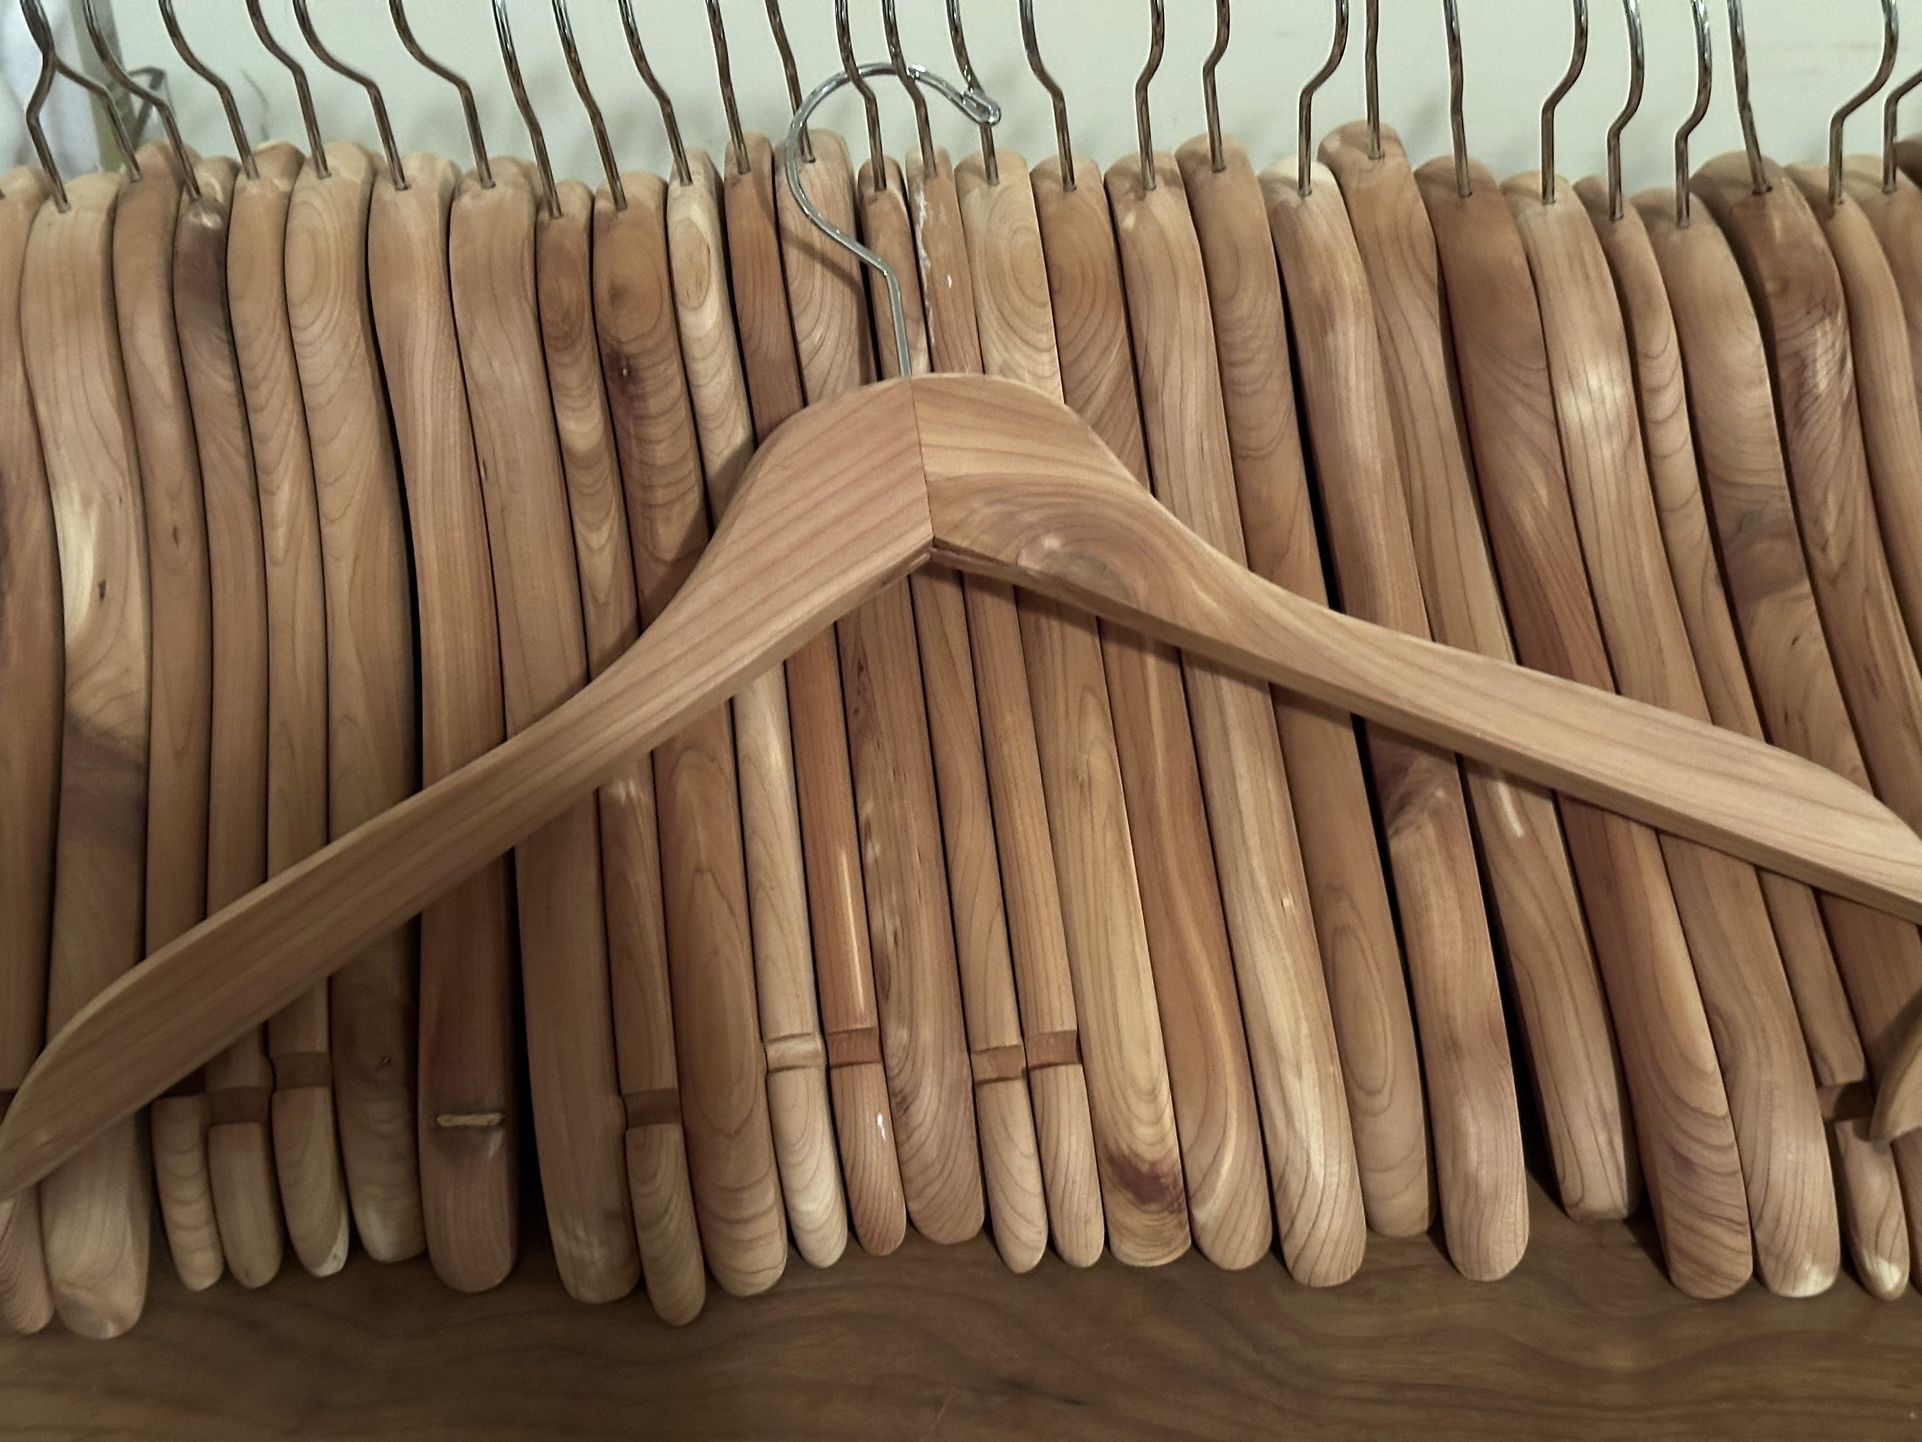 25 Cedar Wood Clothes Hangars! From Container Store